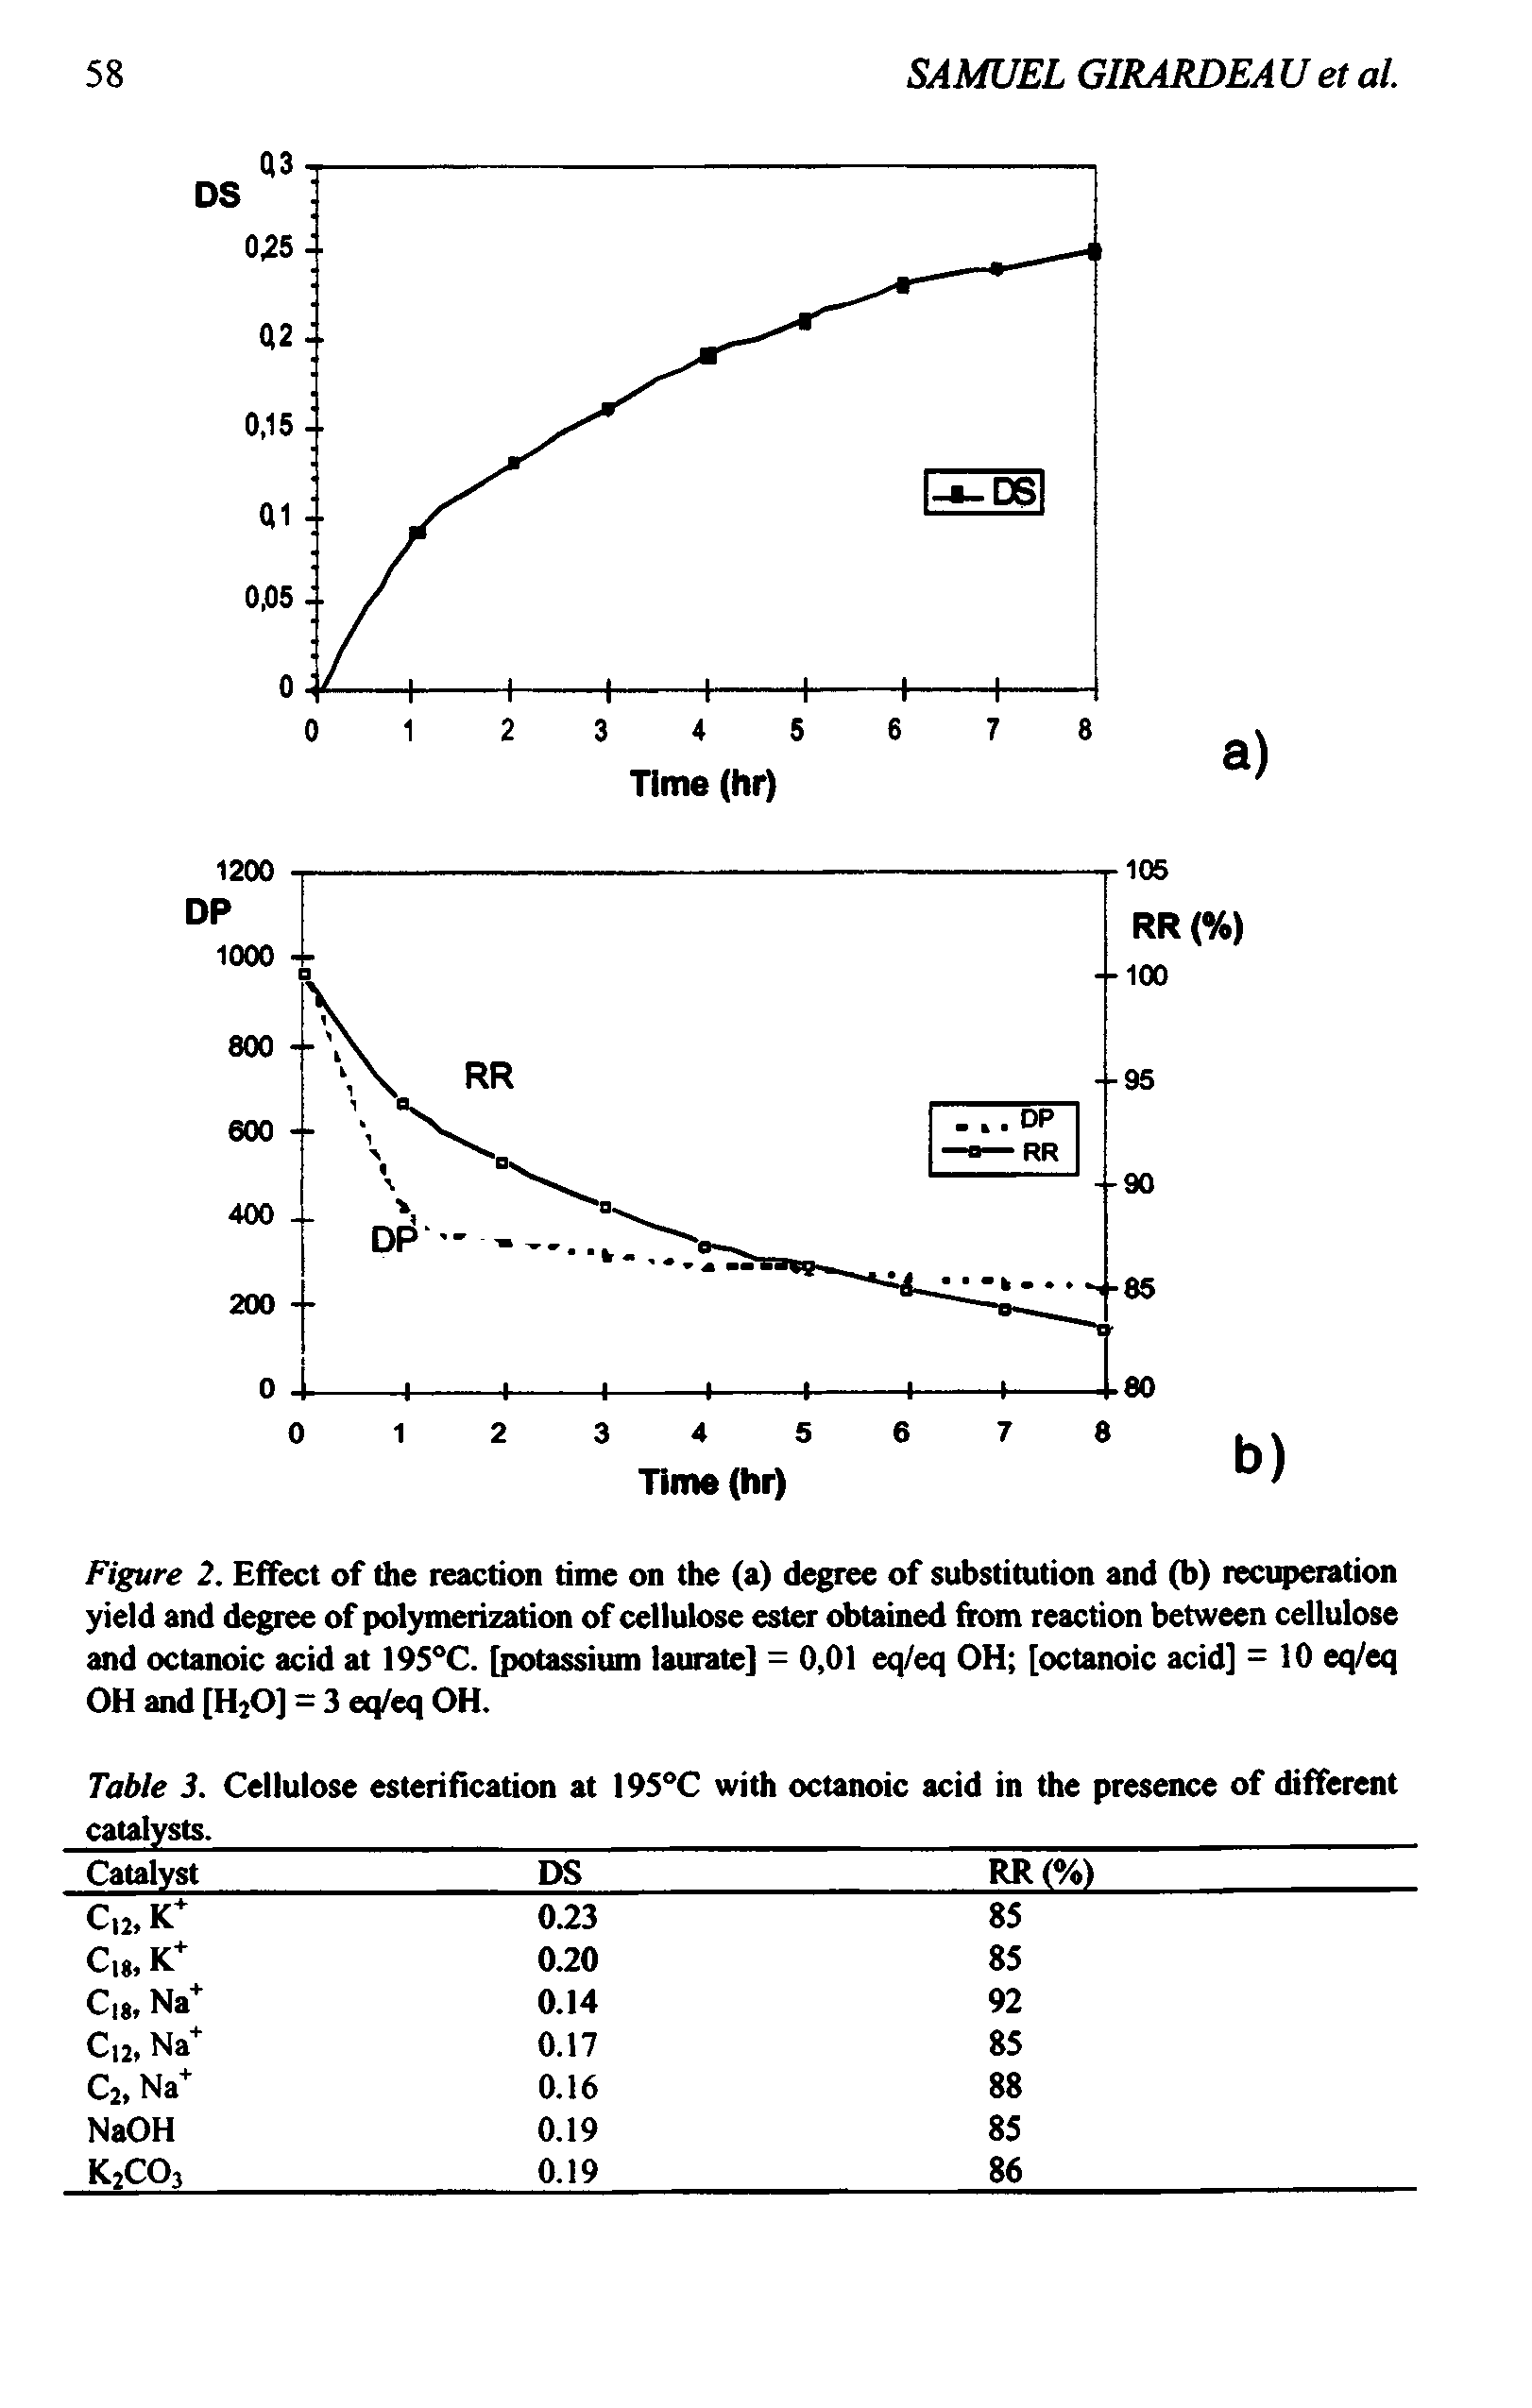 Figure 2. Effect of the reaction time on the (a) degree of substitution and (b) recuperation yield and degree of polymerization of cellulose ester obtained from reaction between cellulose and octanoic acid at 195°C. [potassium laurate] = 0,01 eq/eq OH [octanoic acid] = 10 eq/eq OH and [HjO] = 3 eq/eq OH.